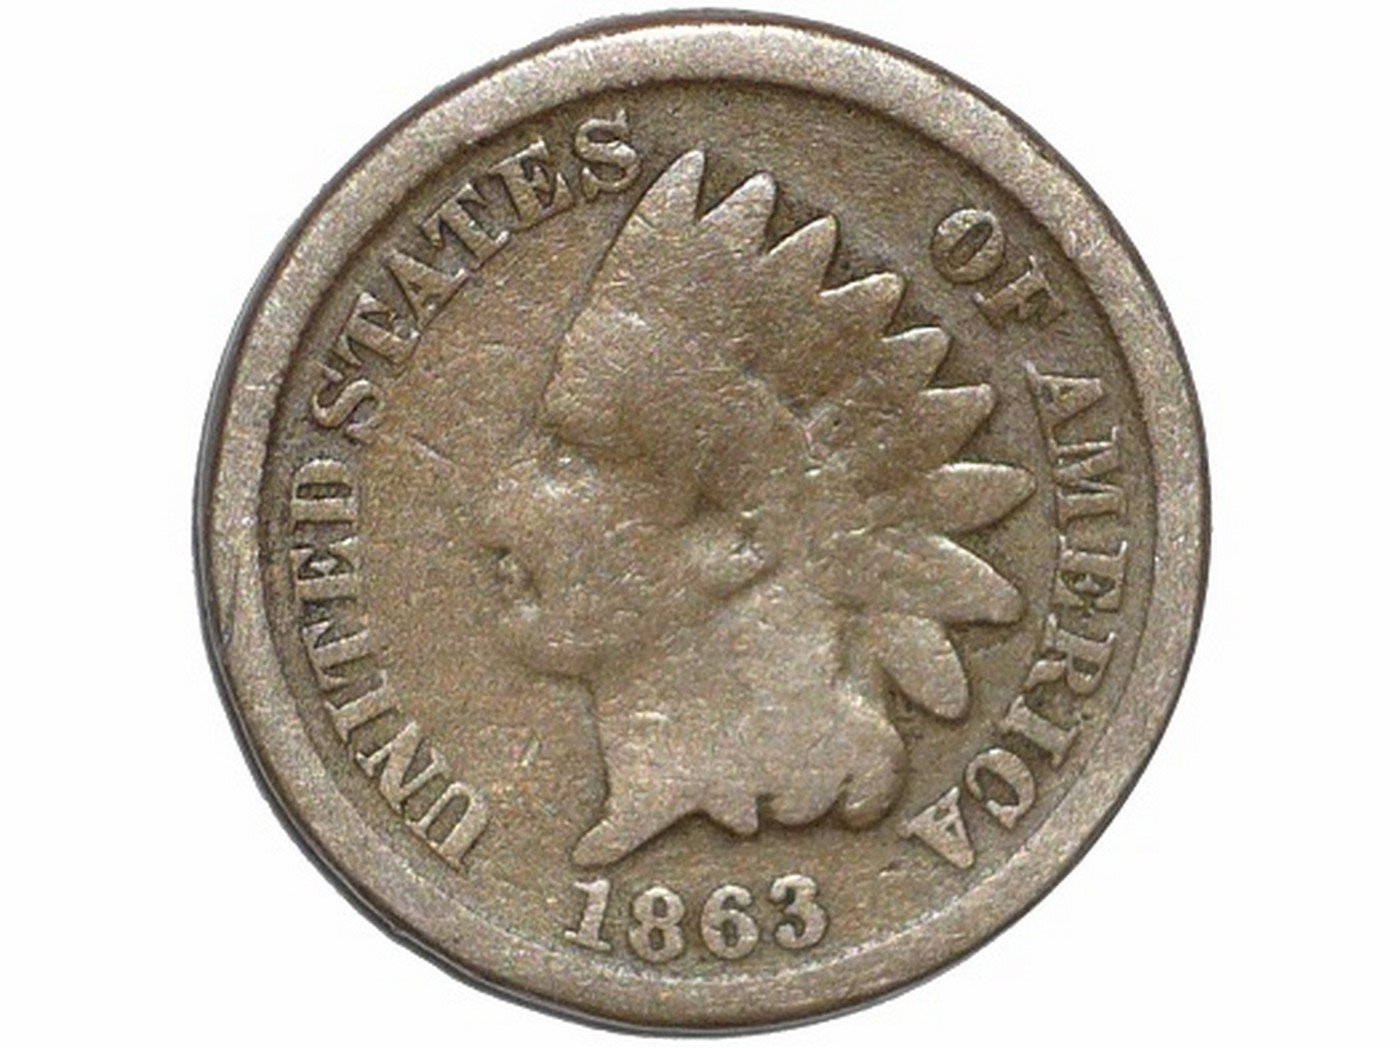 1863 Obverse of CUD-024 - Indian Head Penny - Photo by David Poliquin